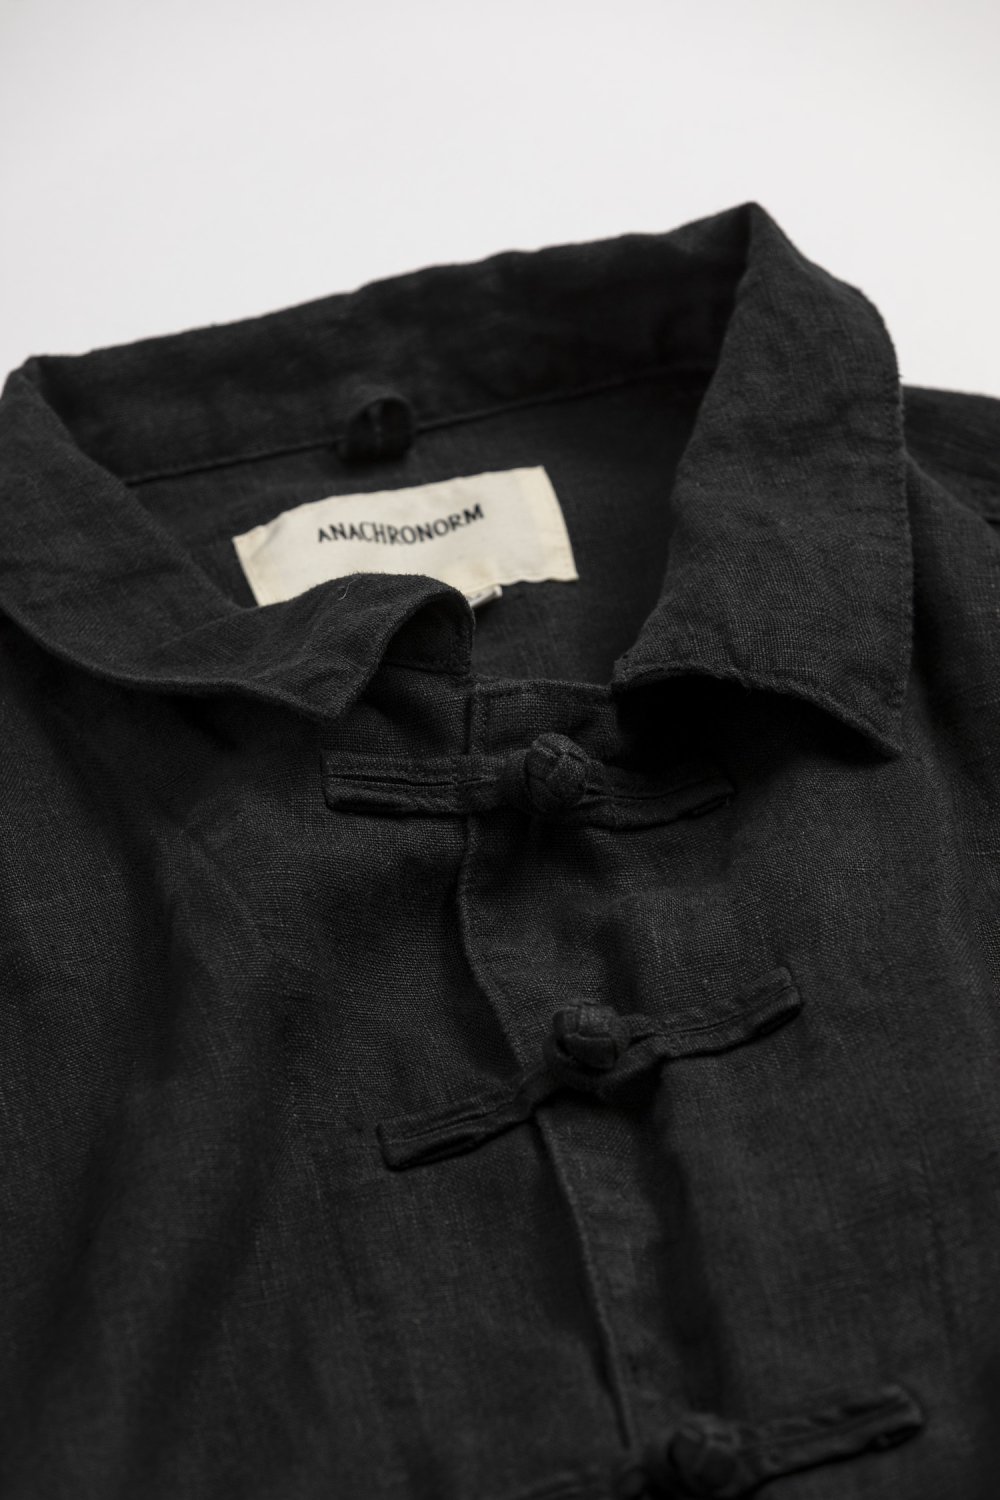 ANACHRONORM “ROLL UP SLEEVES CHINA COVERALL SHIRTS” - TRIBECA 